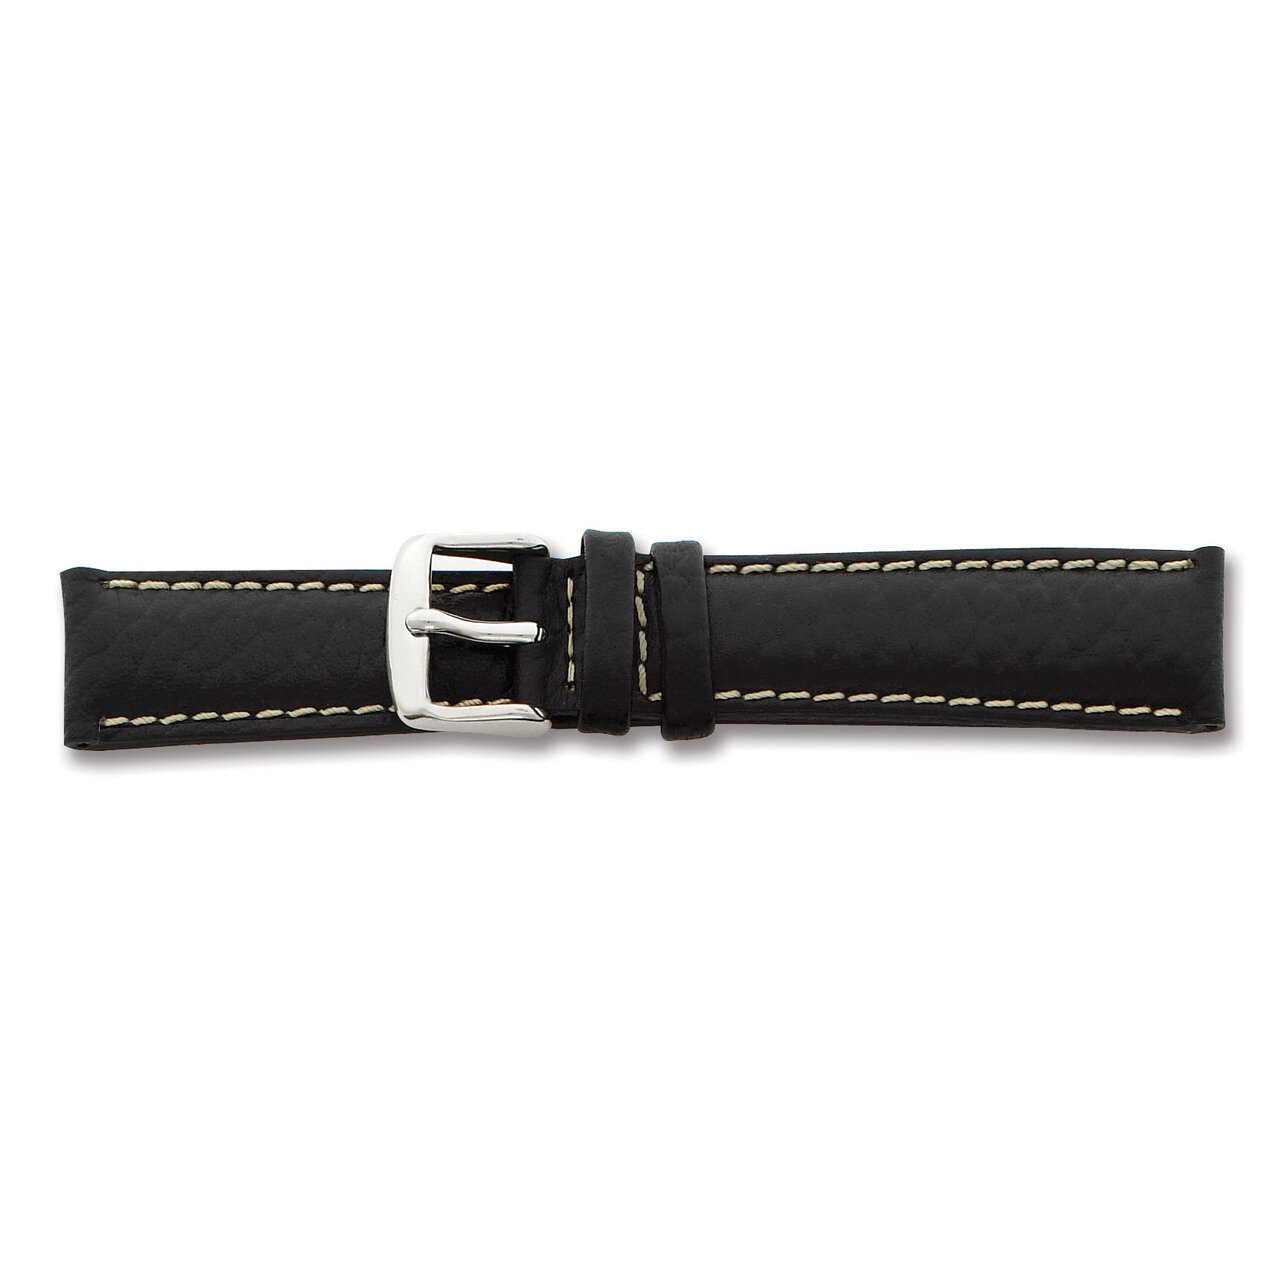 26mm Long Black Sport Leather Watch Band 8.5 Inch Silver-tone Buckle BA99L-26